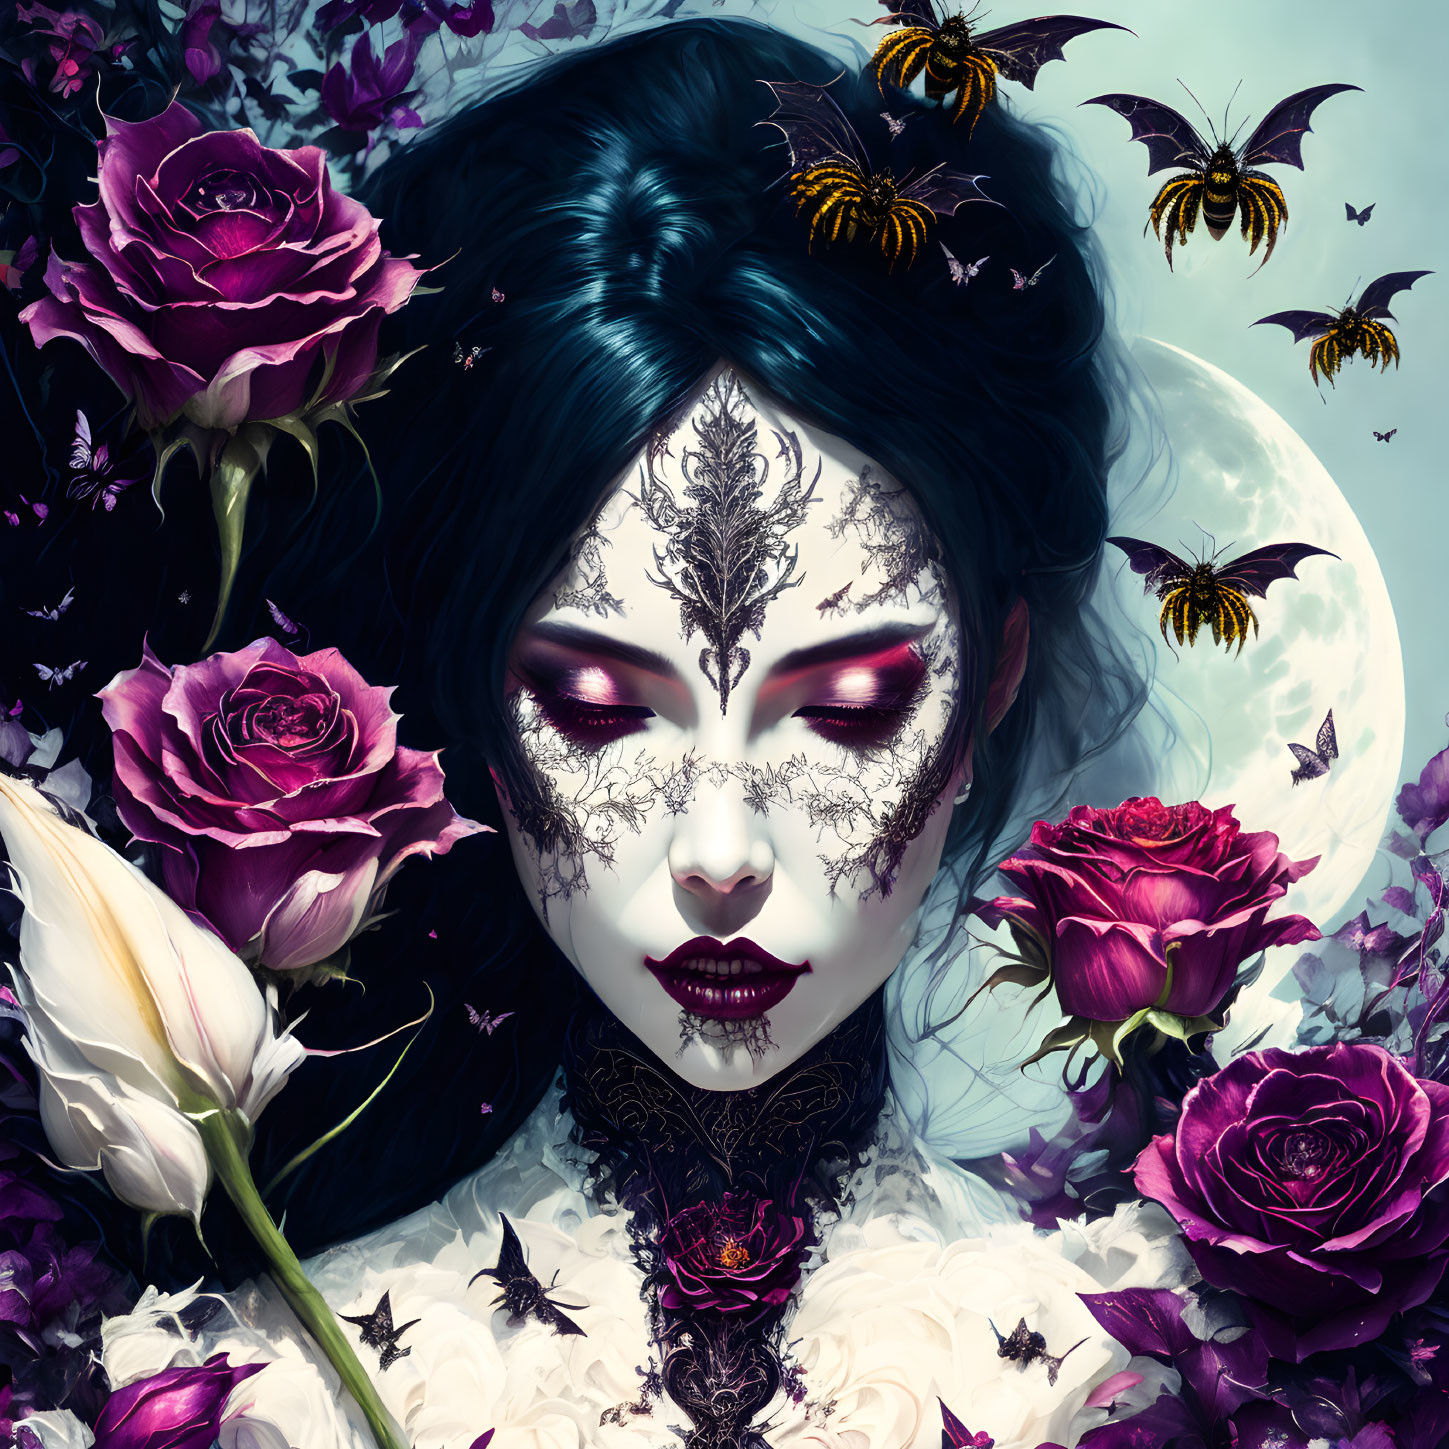 Woman with dark hair and stylized makeup among purple roses and bumblebees in moonlit scene